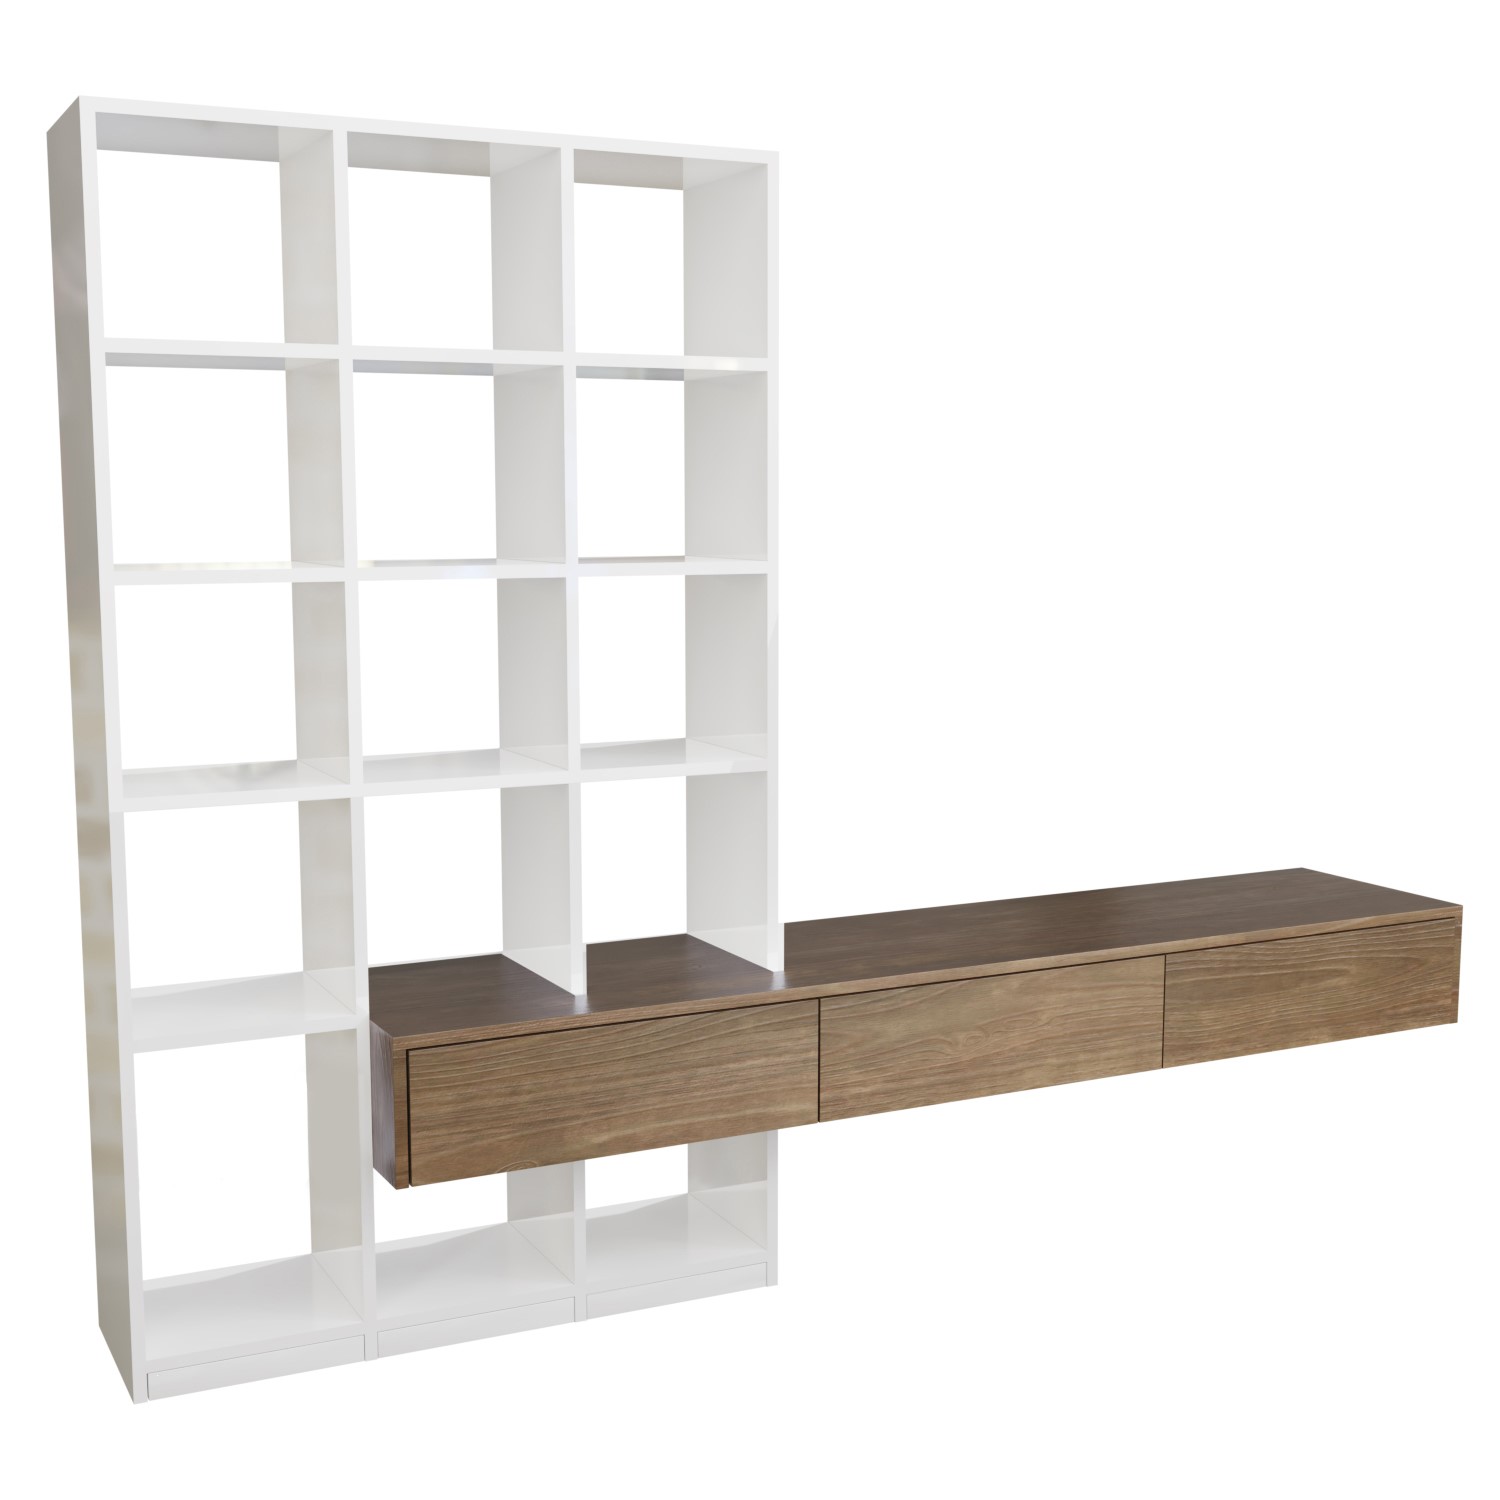 Read more about Large white gloss and oak bookcase with storage drawers